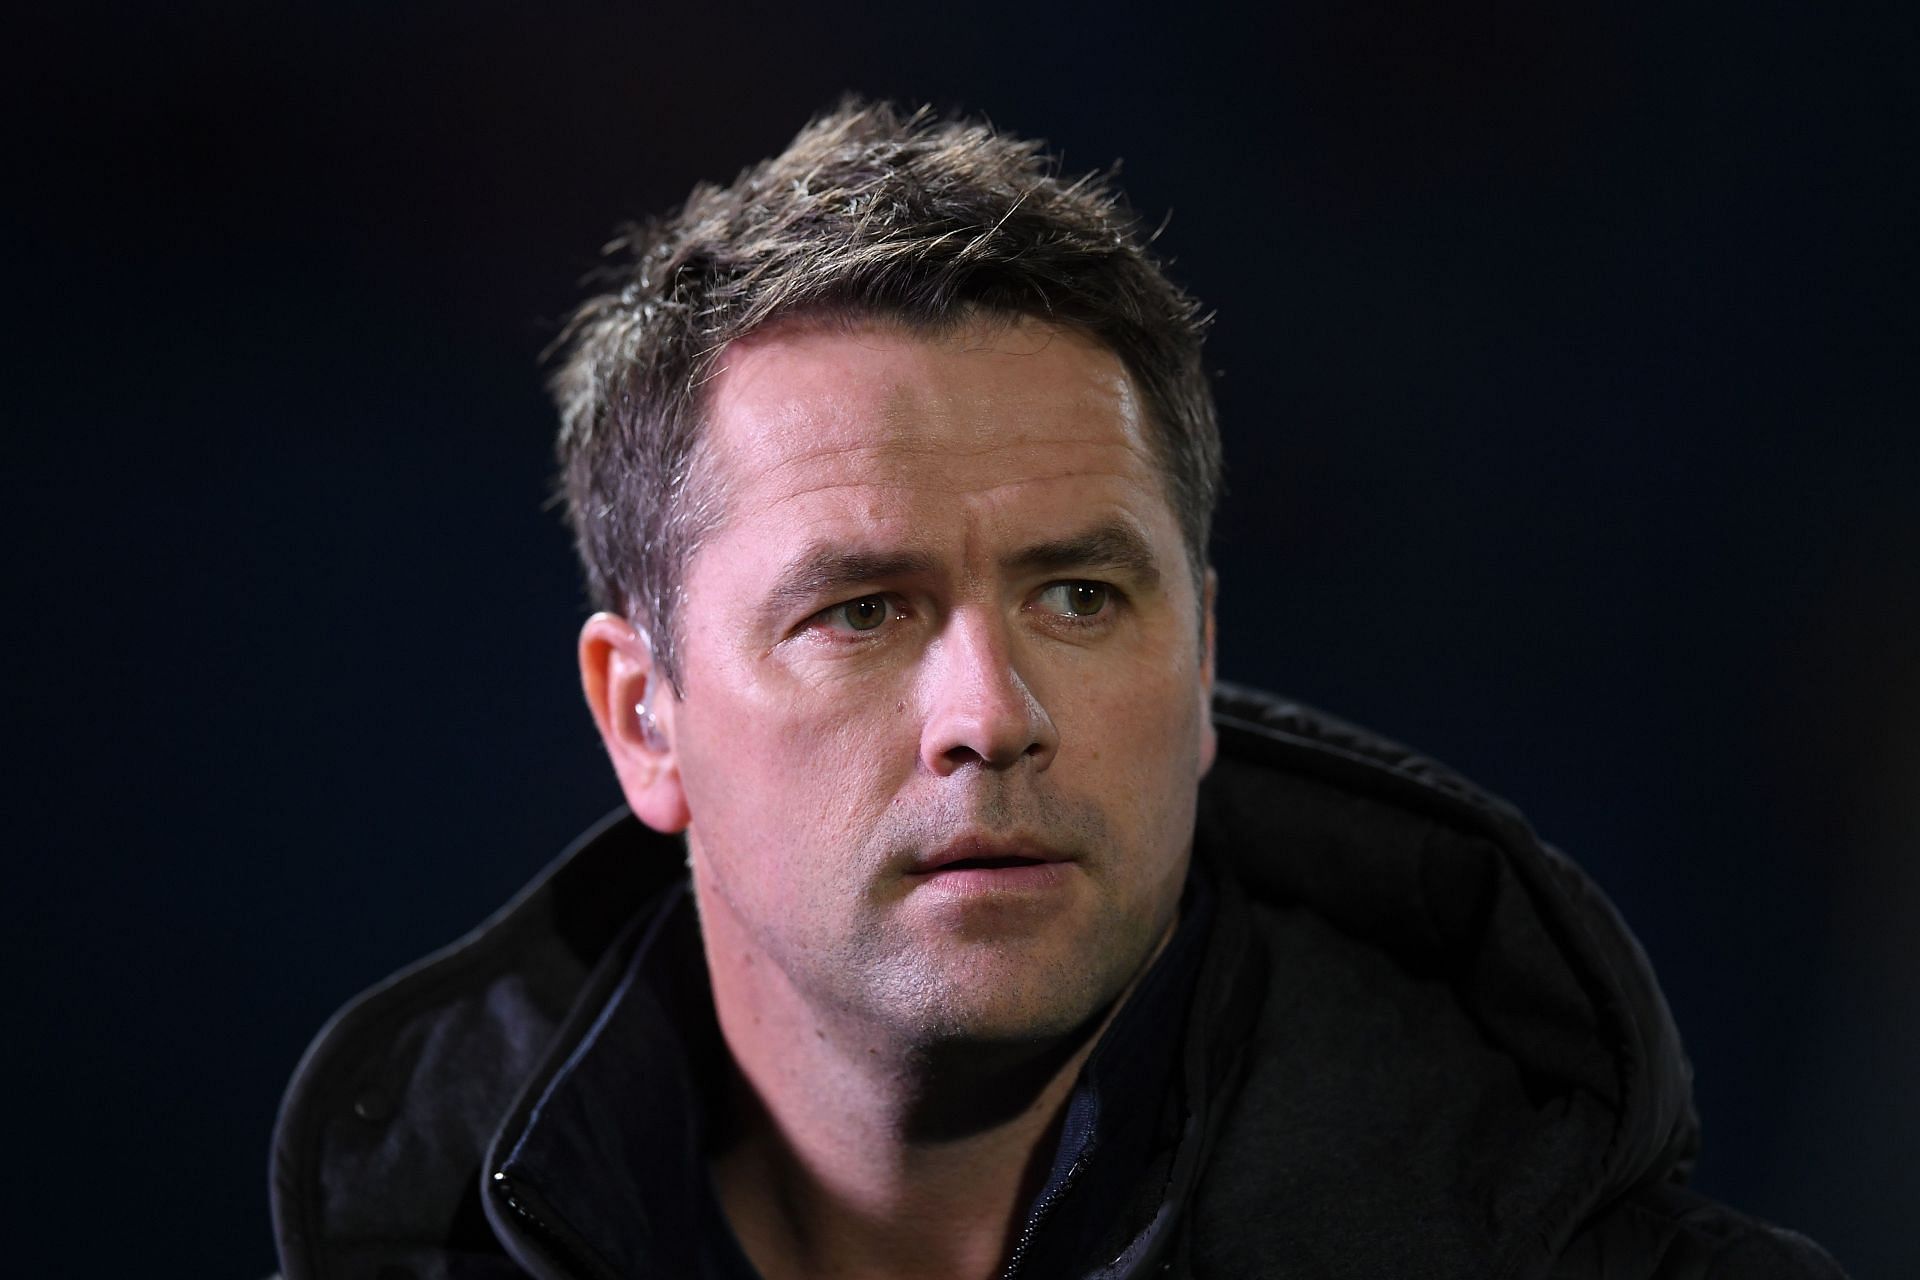 Former Manchester United forward Michael Owen. (Photo by Laurence Griffiths/Getty Images)